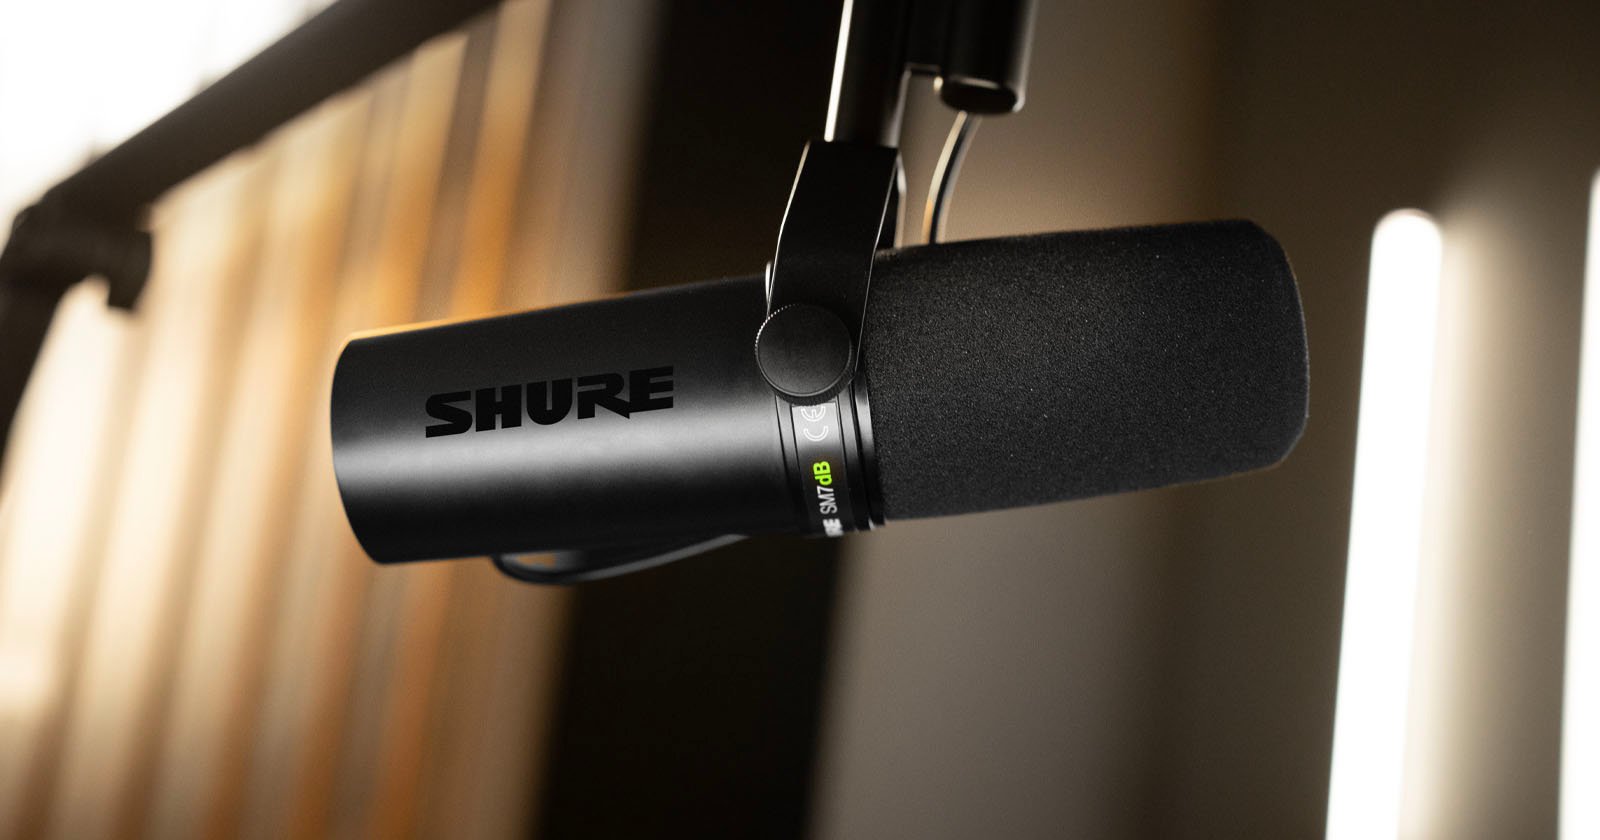 Shure’s New Vocal Mic Has a Built-In Preamp to Simplify Audio Workflows